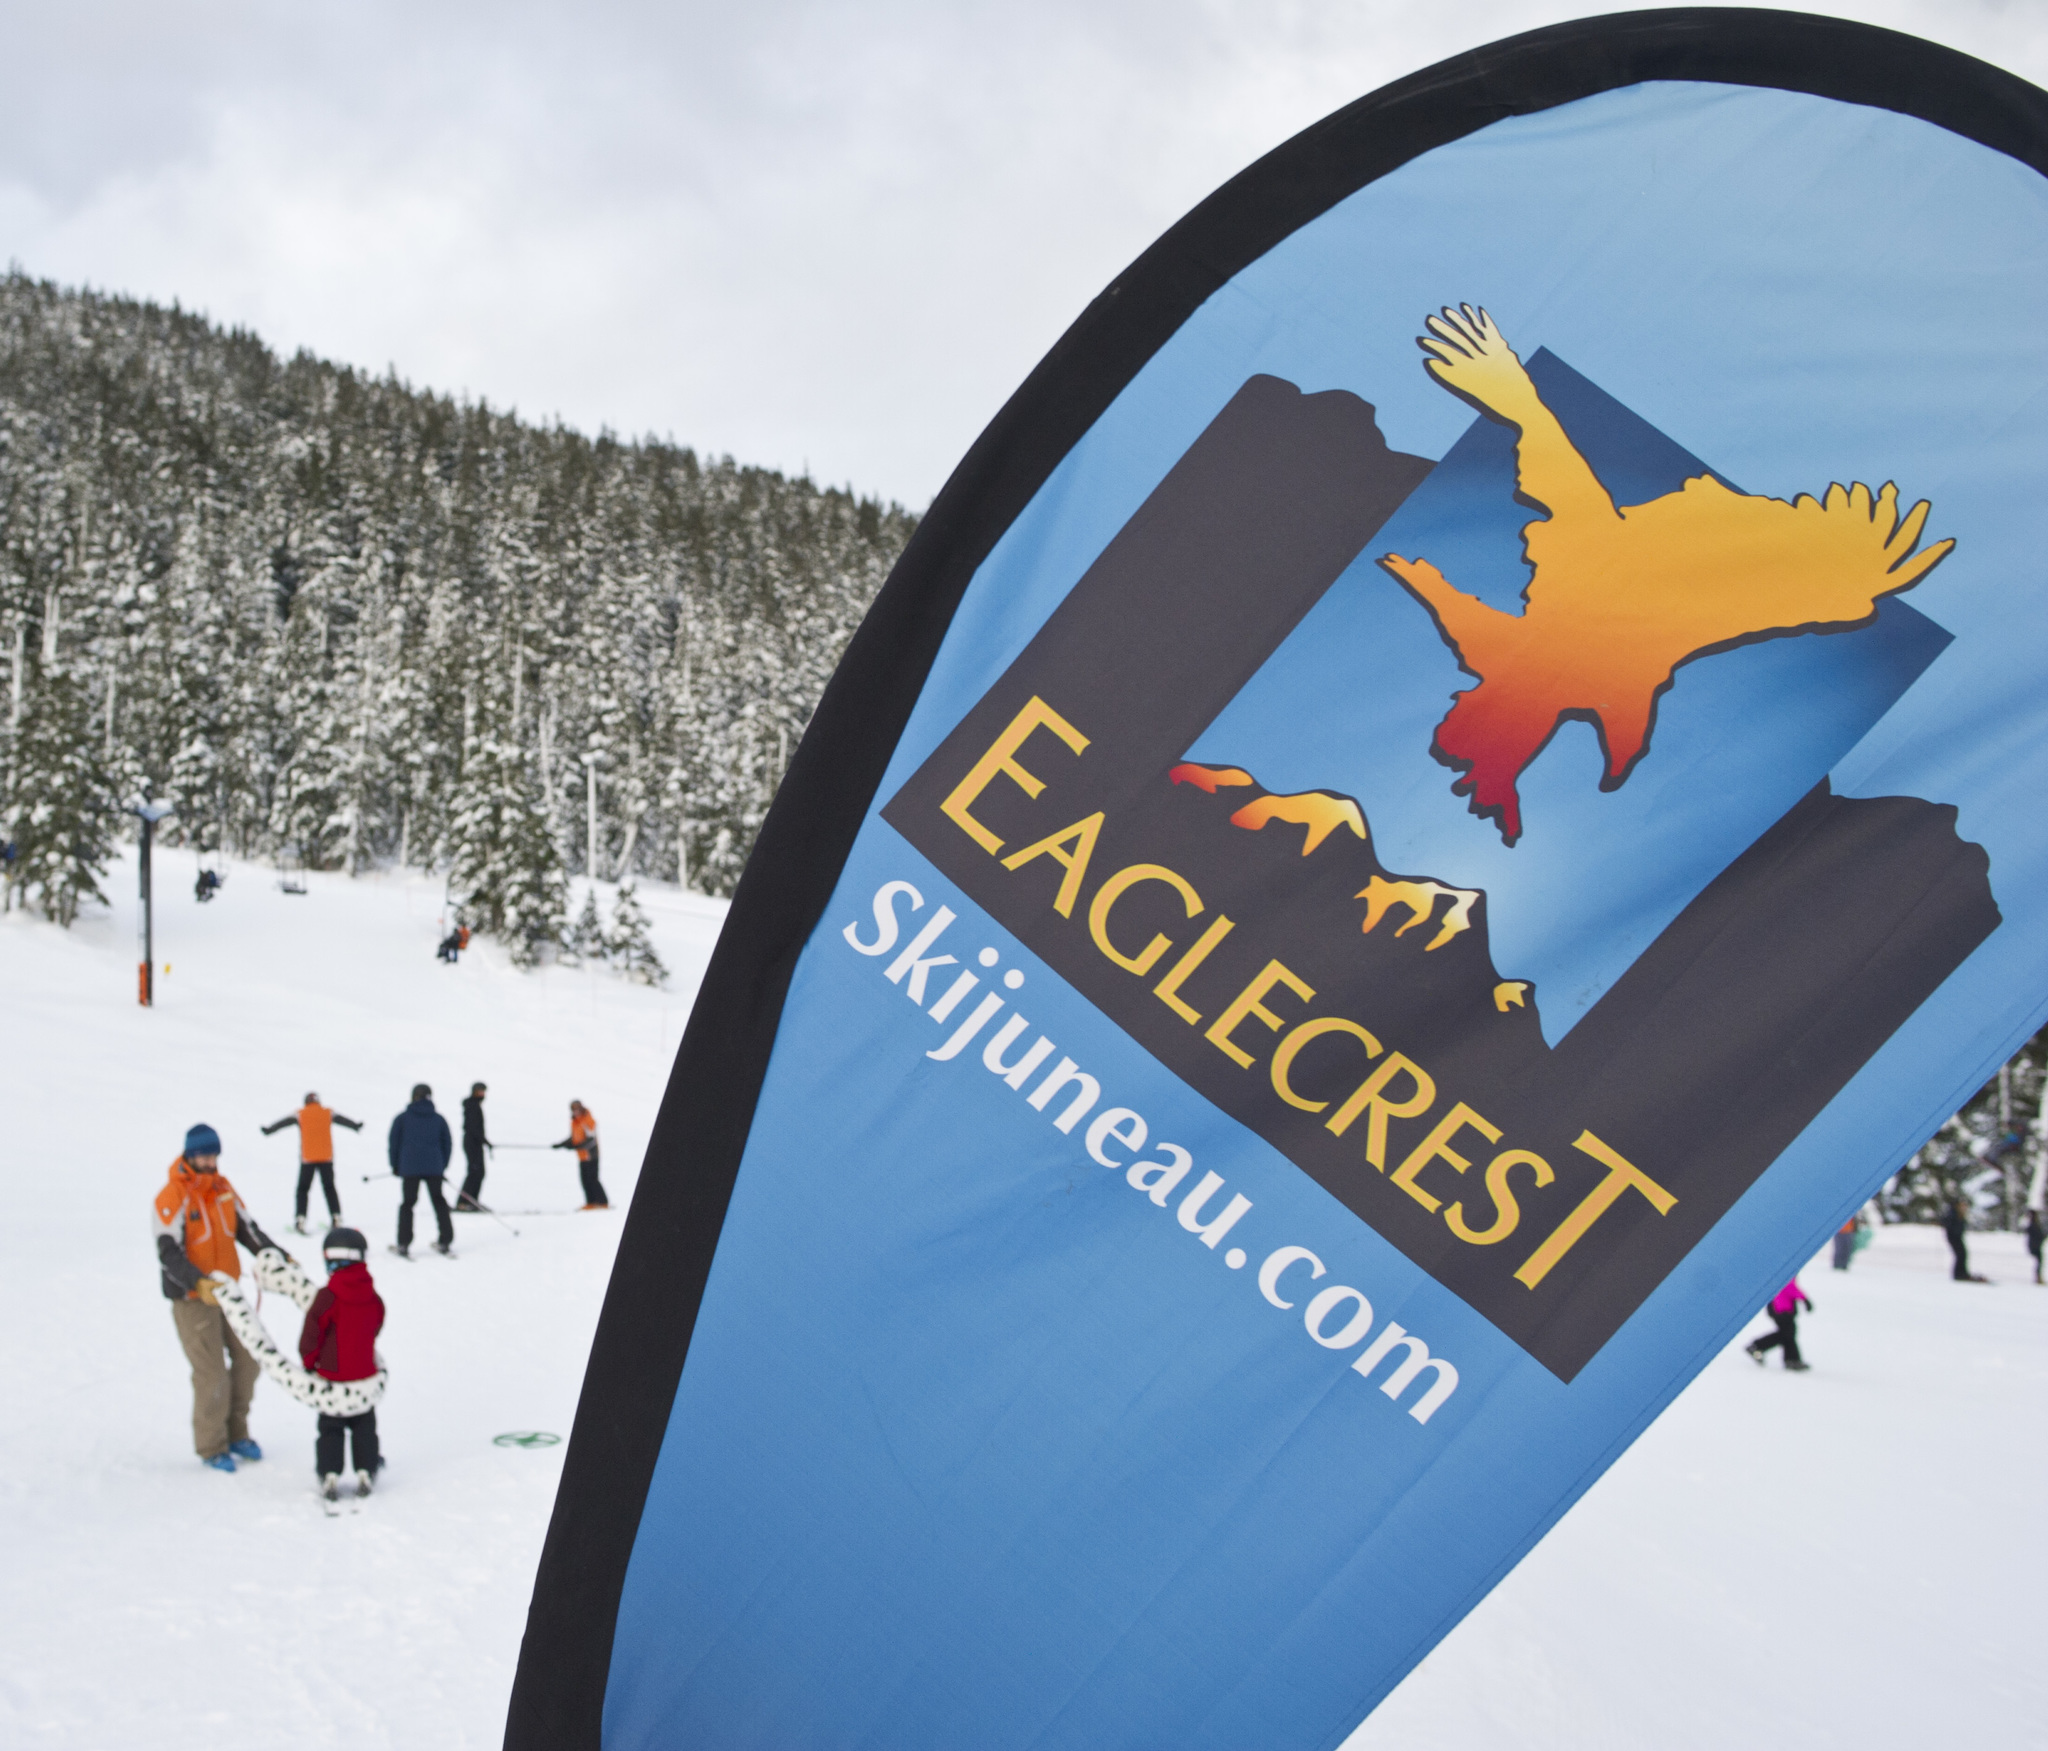 The World’s Largest Lesson at Eaglecrest took place on Jan. 6, 2017.